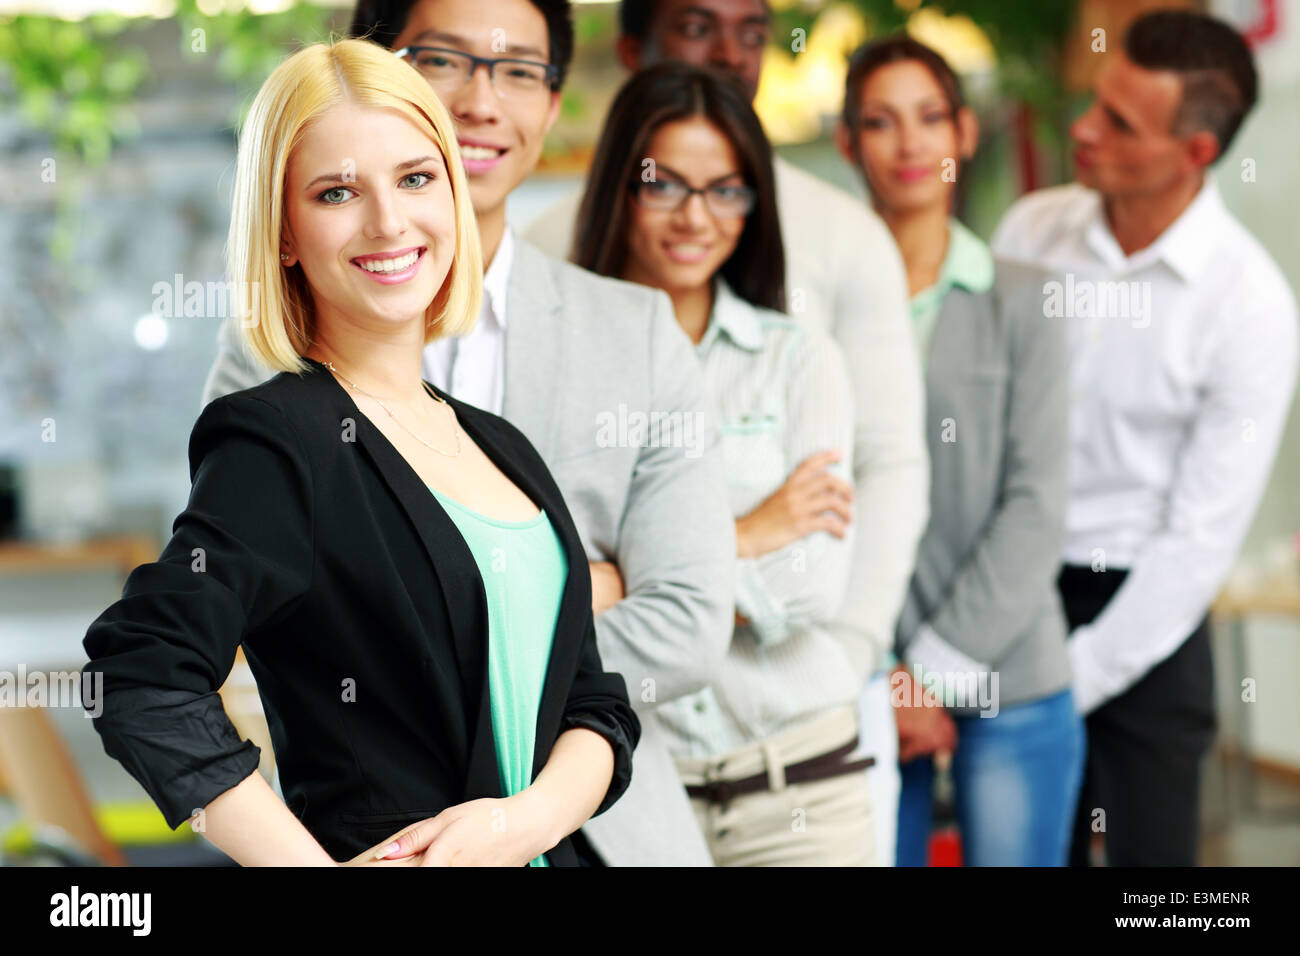 Happy group of business people in the office lined up Stock Photo